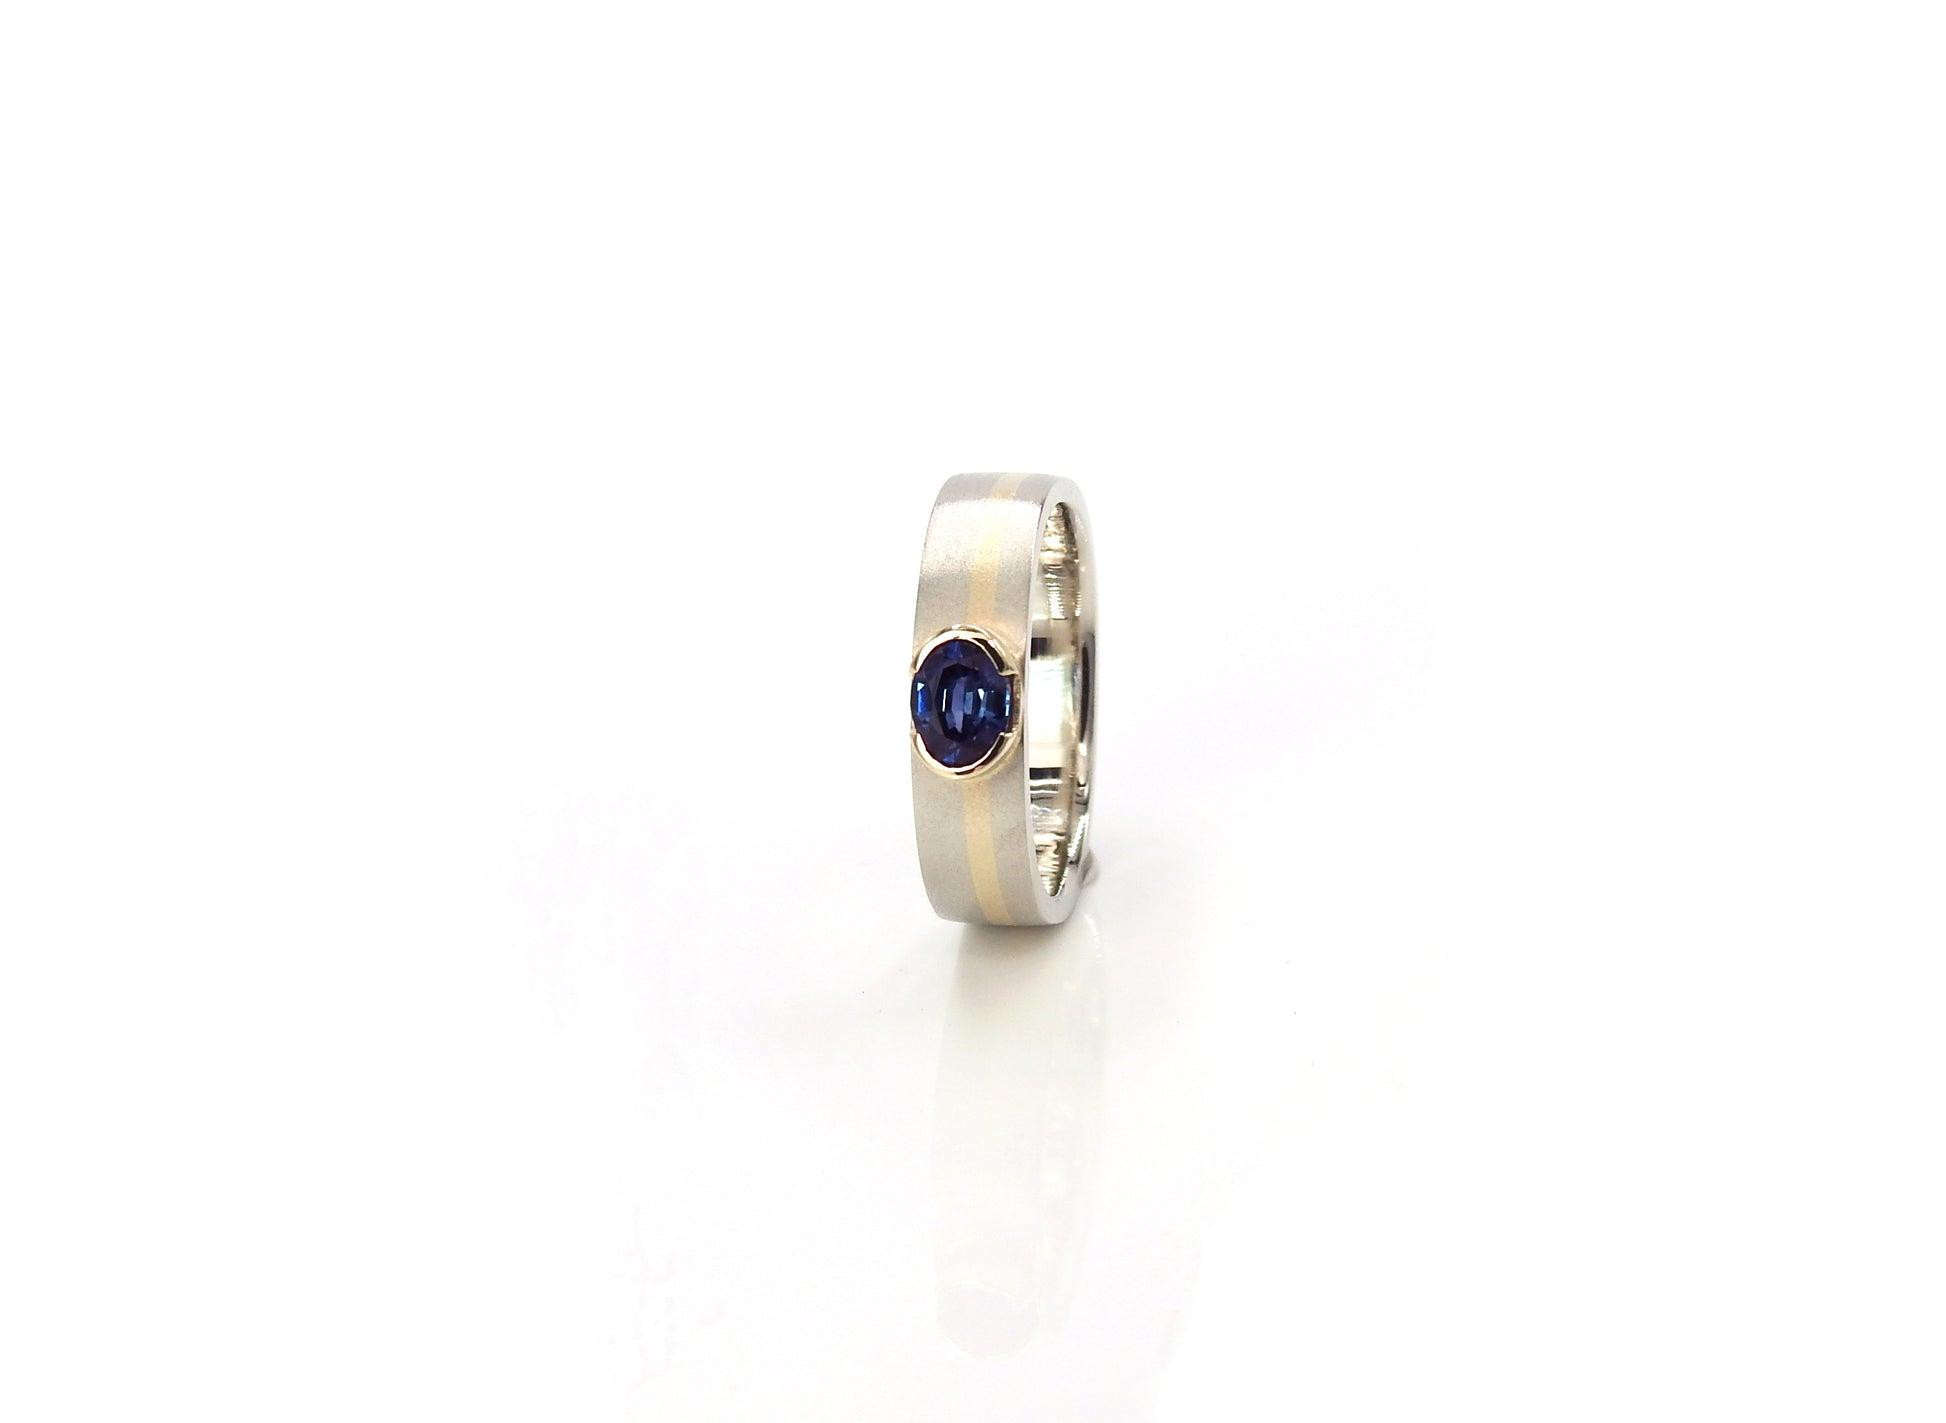 Custom, bespoke, 14kt yellow and white gold ring with oval blue sapphire, by ZEALmetal, Nicole Horlor, in Kingston, ON, Canada